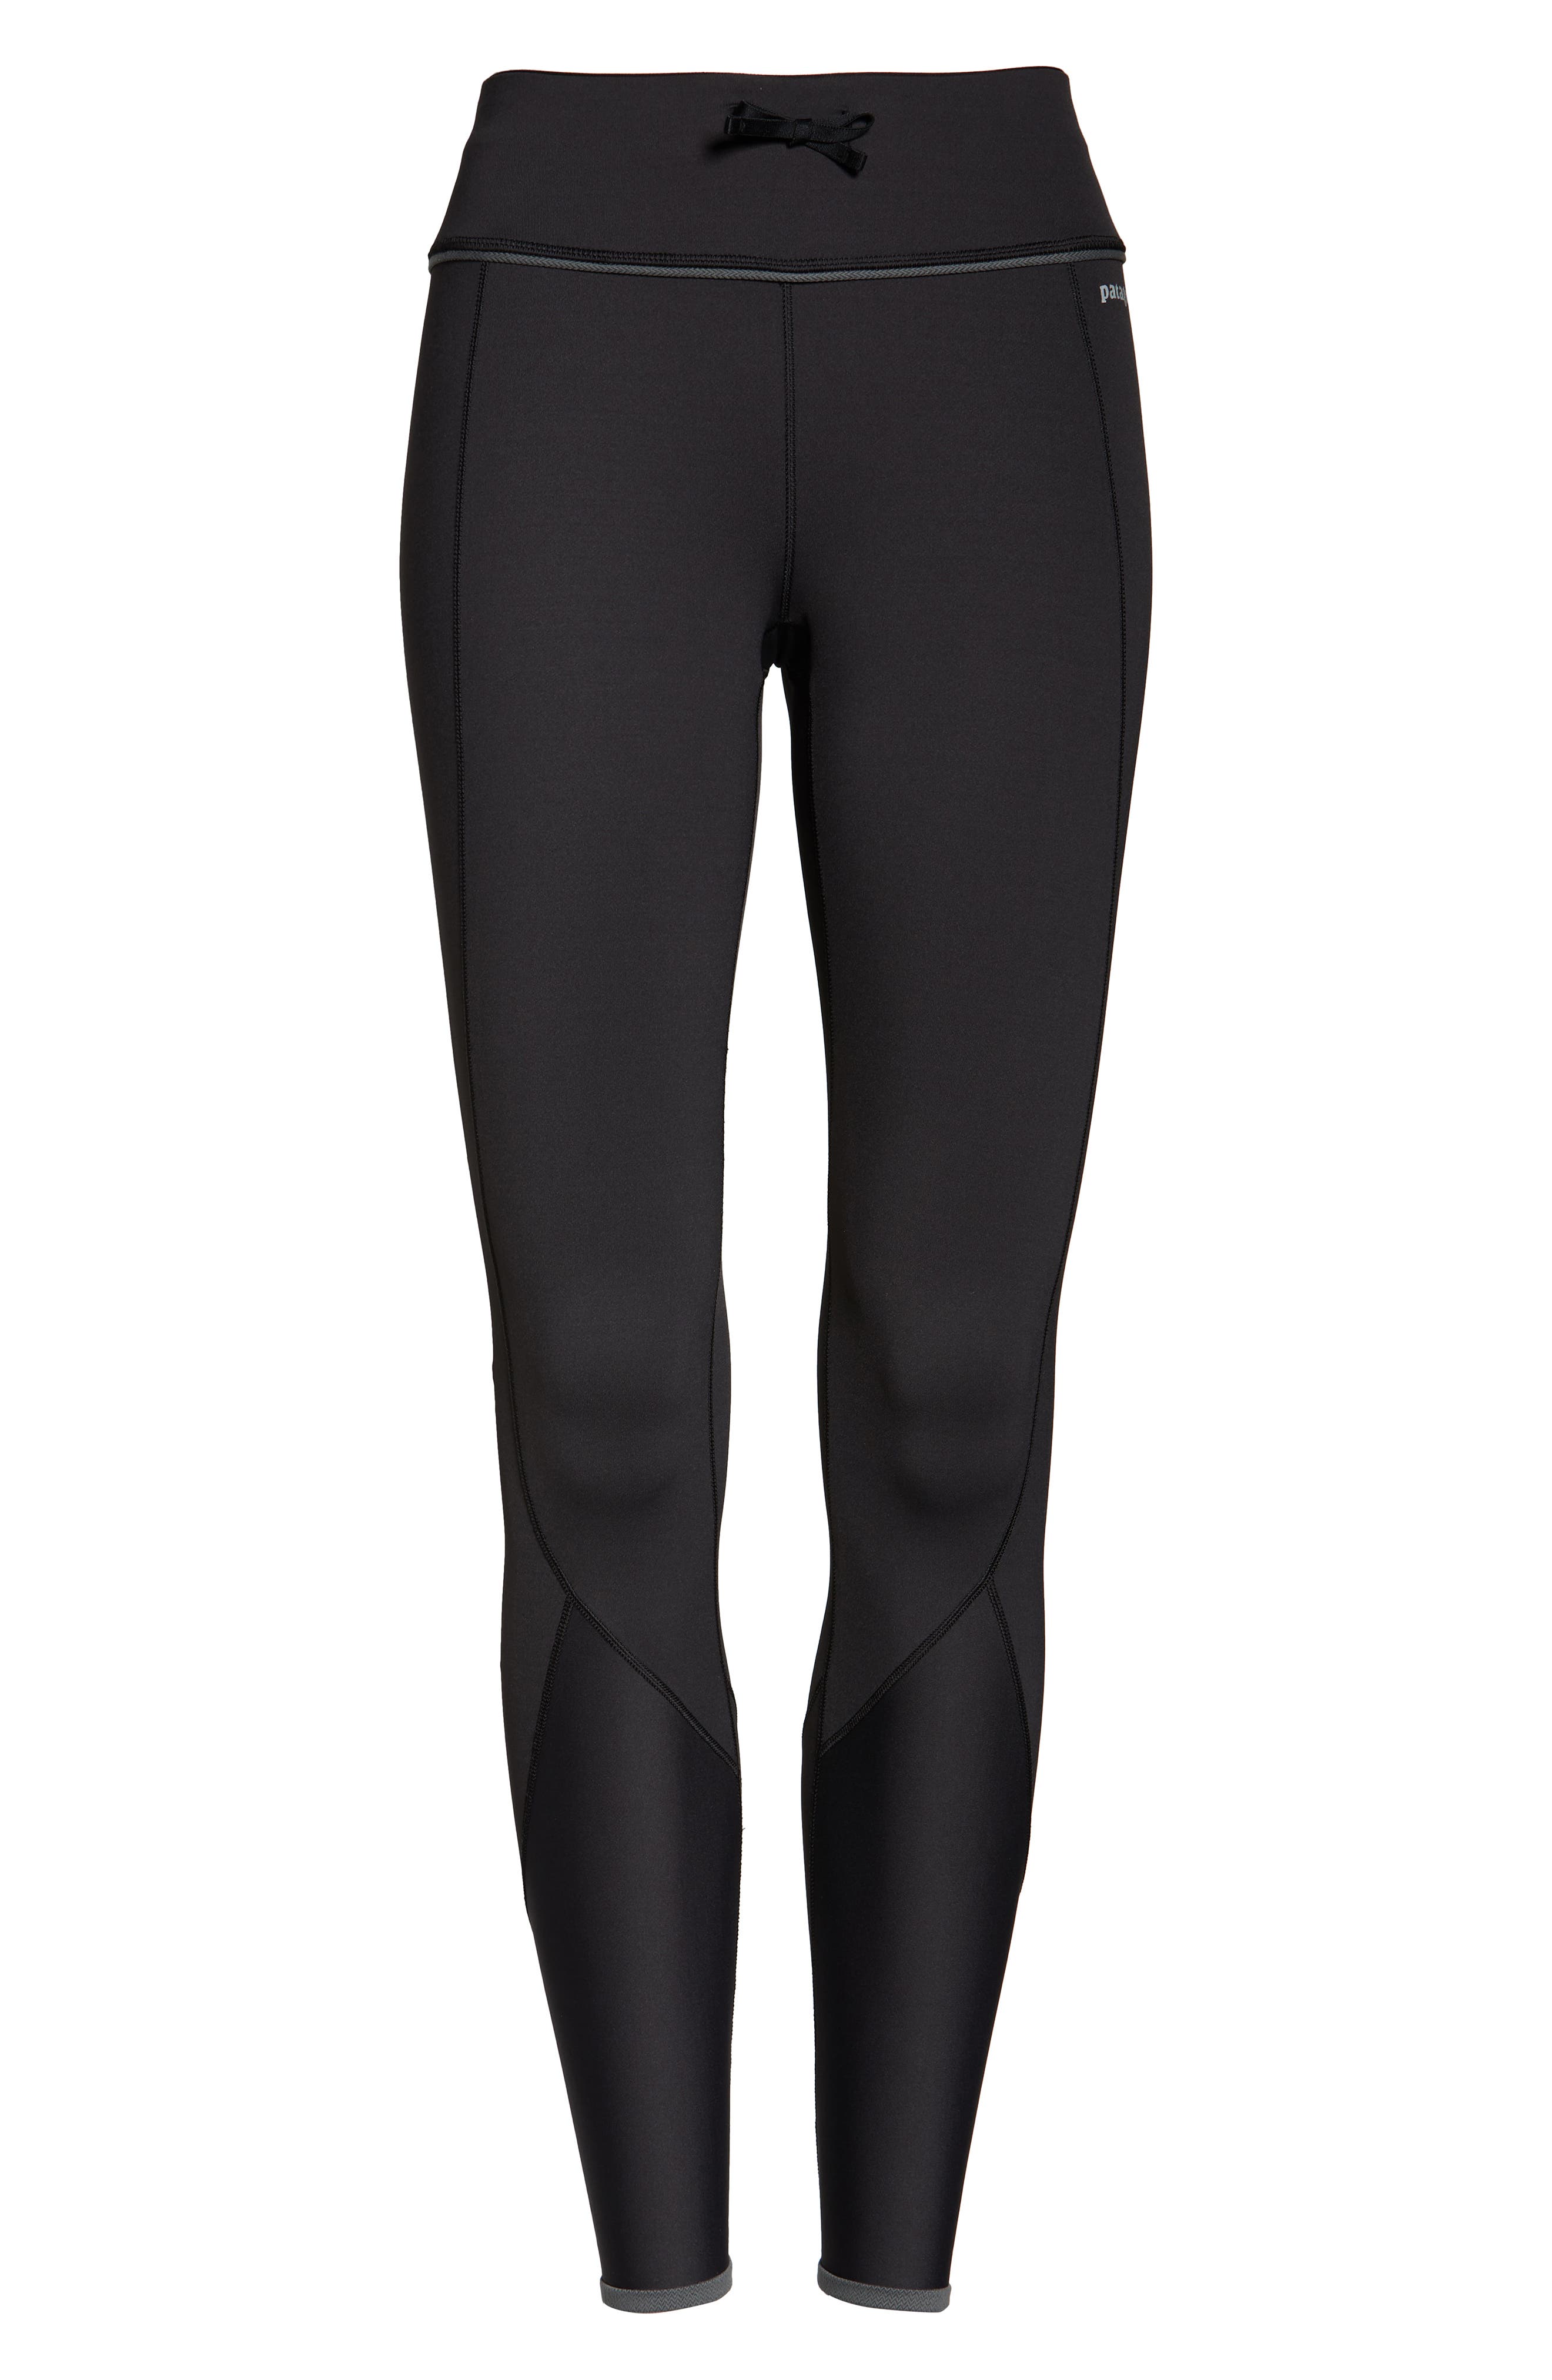 10 Best Workout Leggings With Pockets